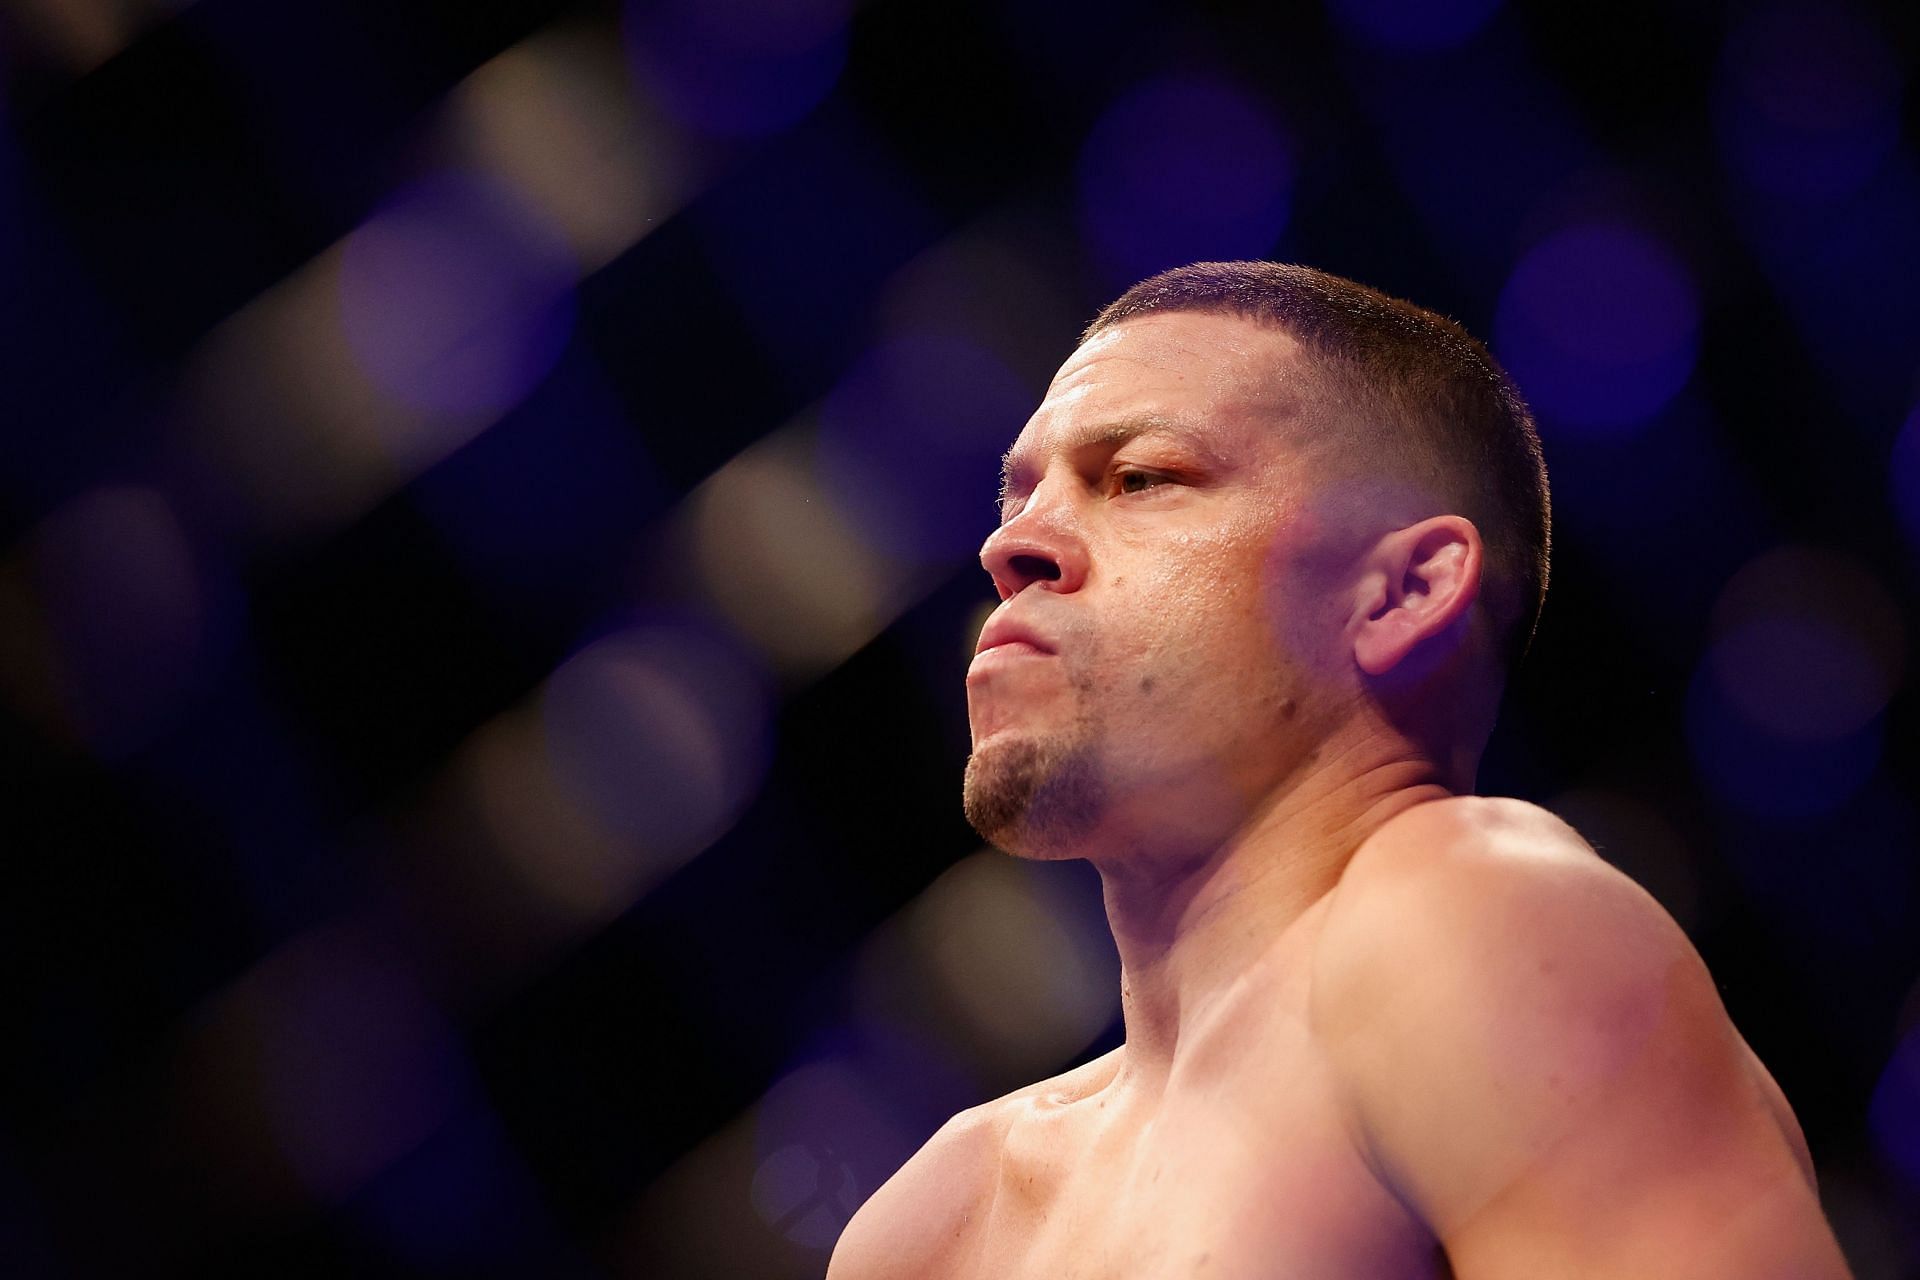 Nate Diaz trolled by fans over recent claims